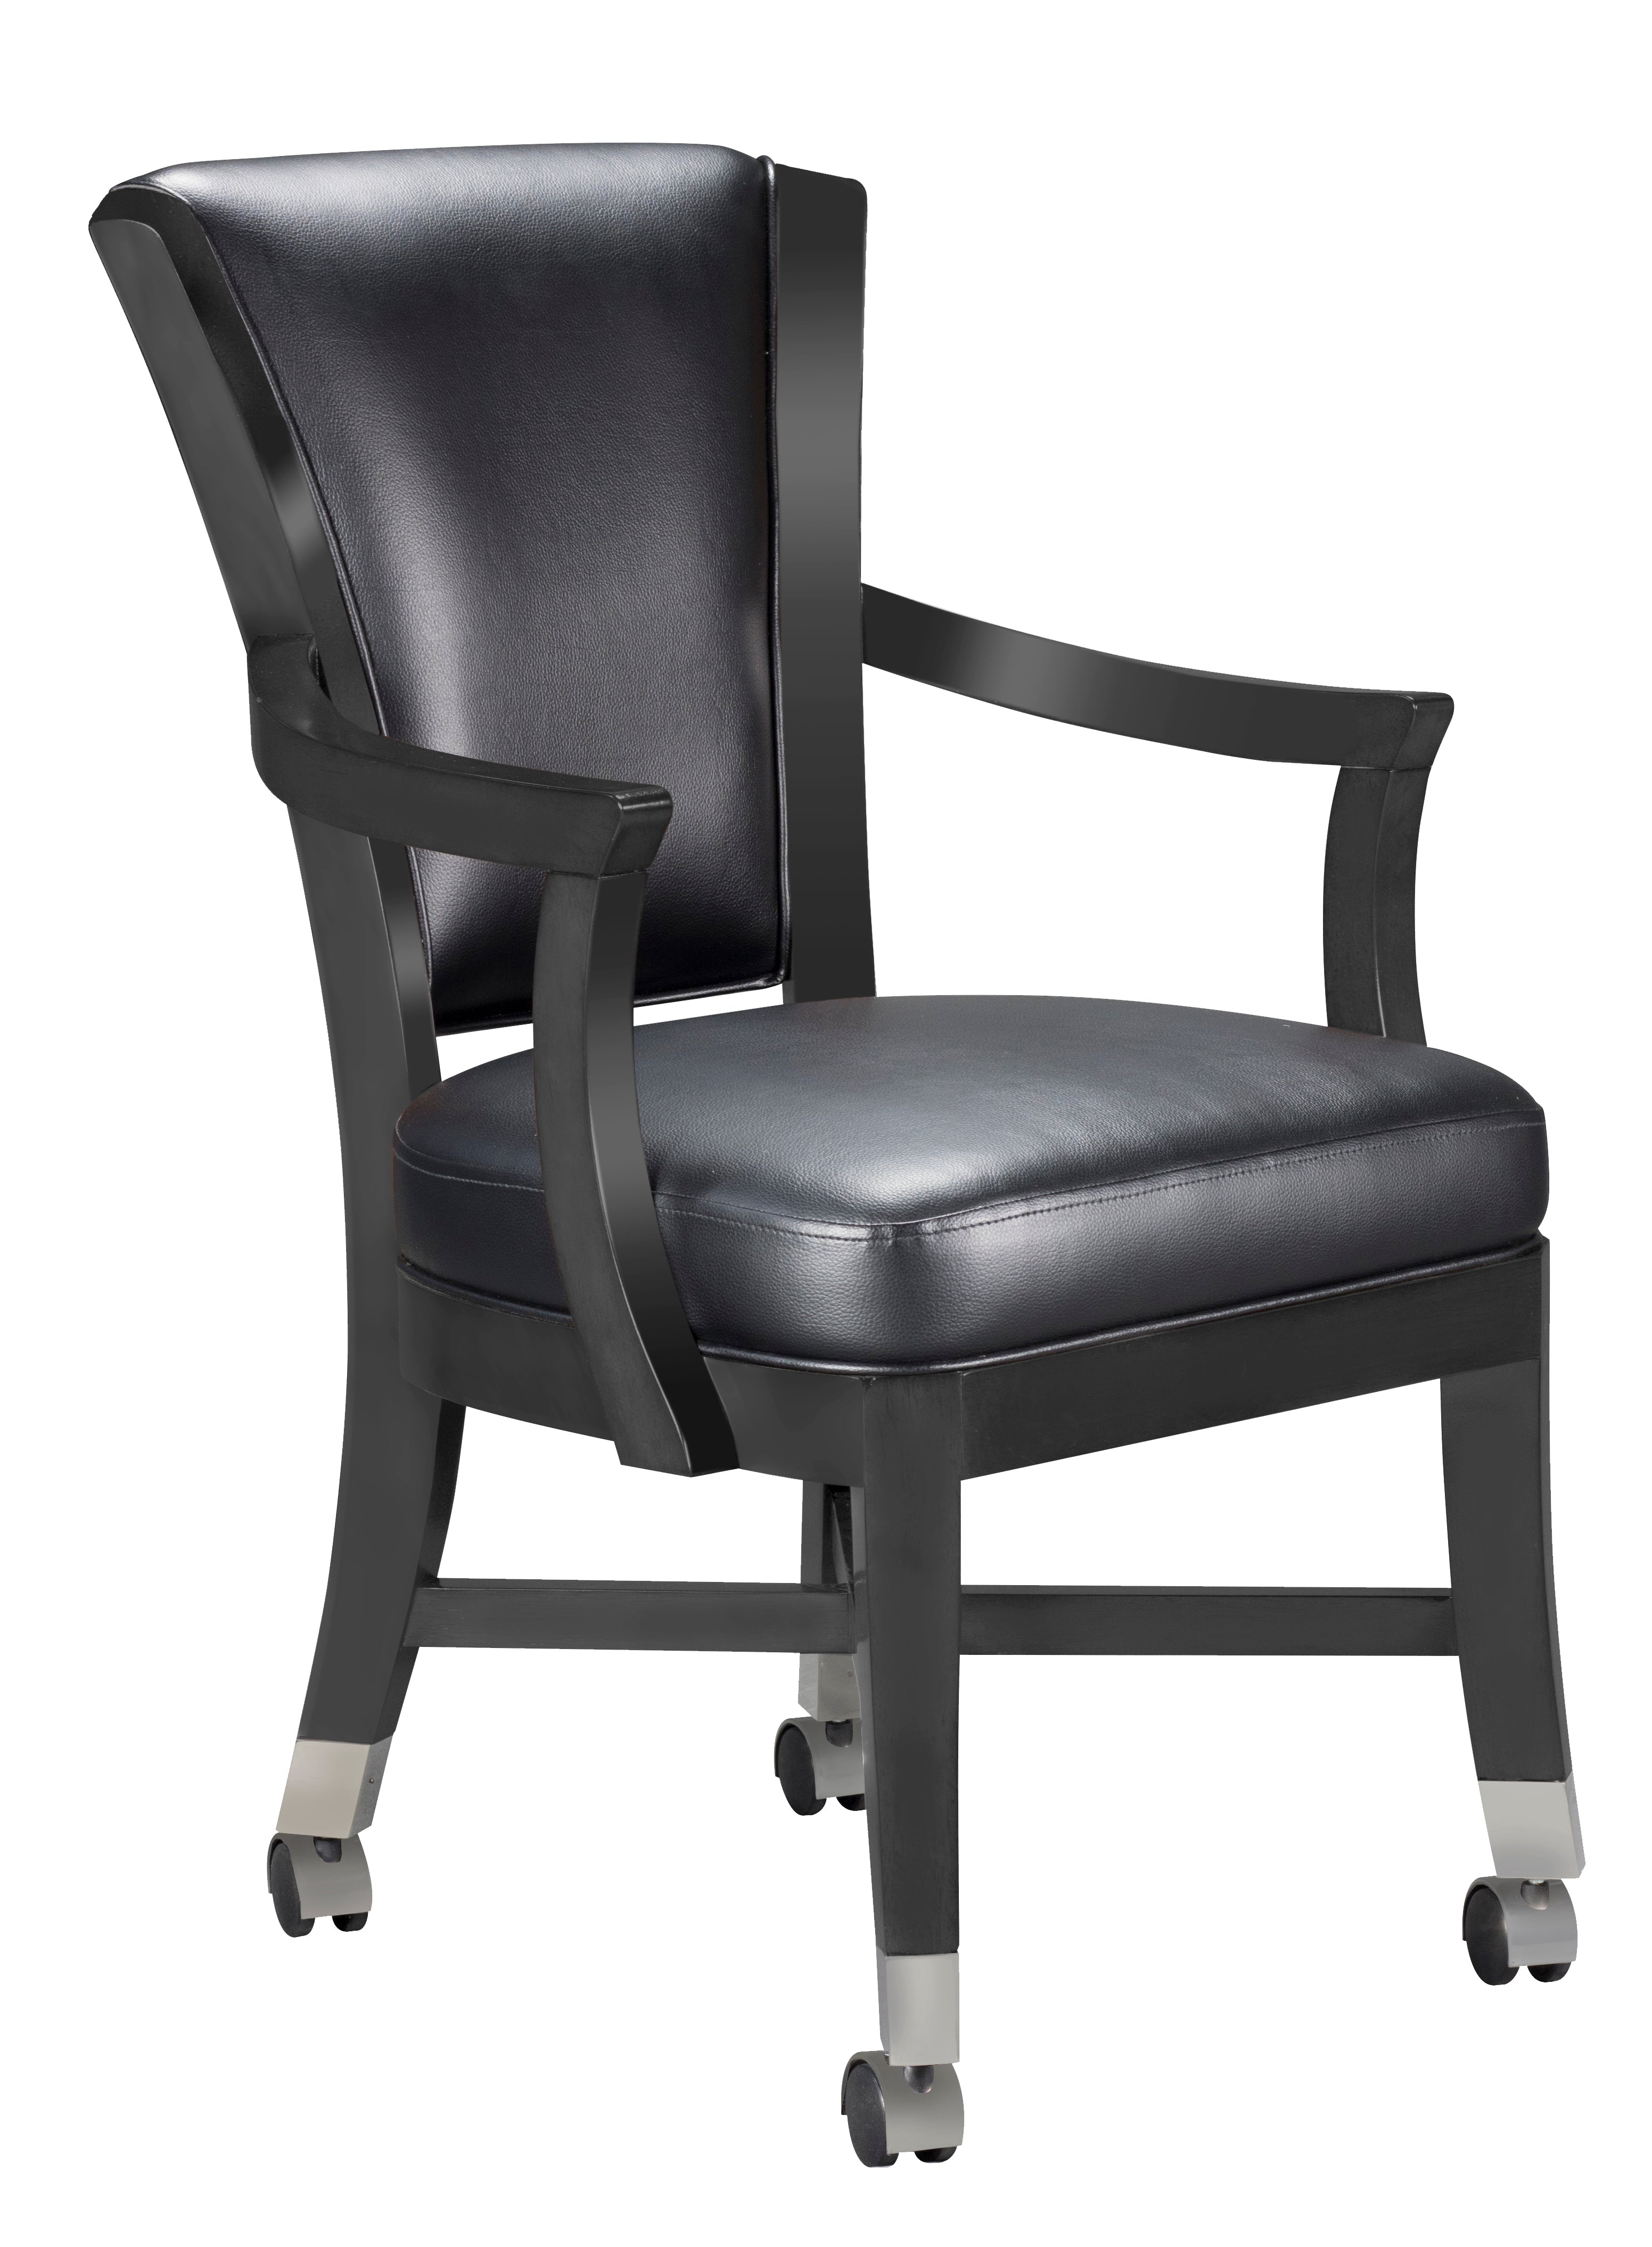 Legacy Billiards Elite Caster Game Chair in Raven Finish